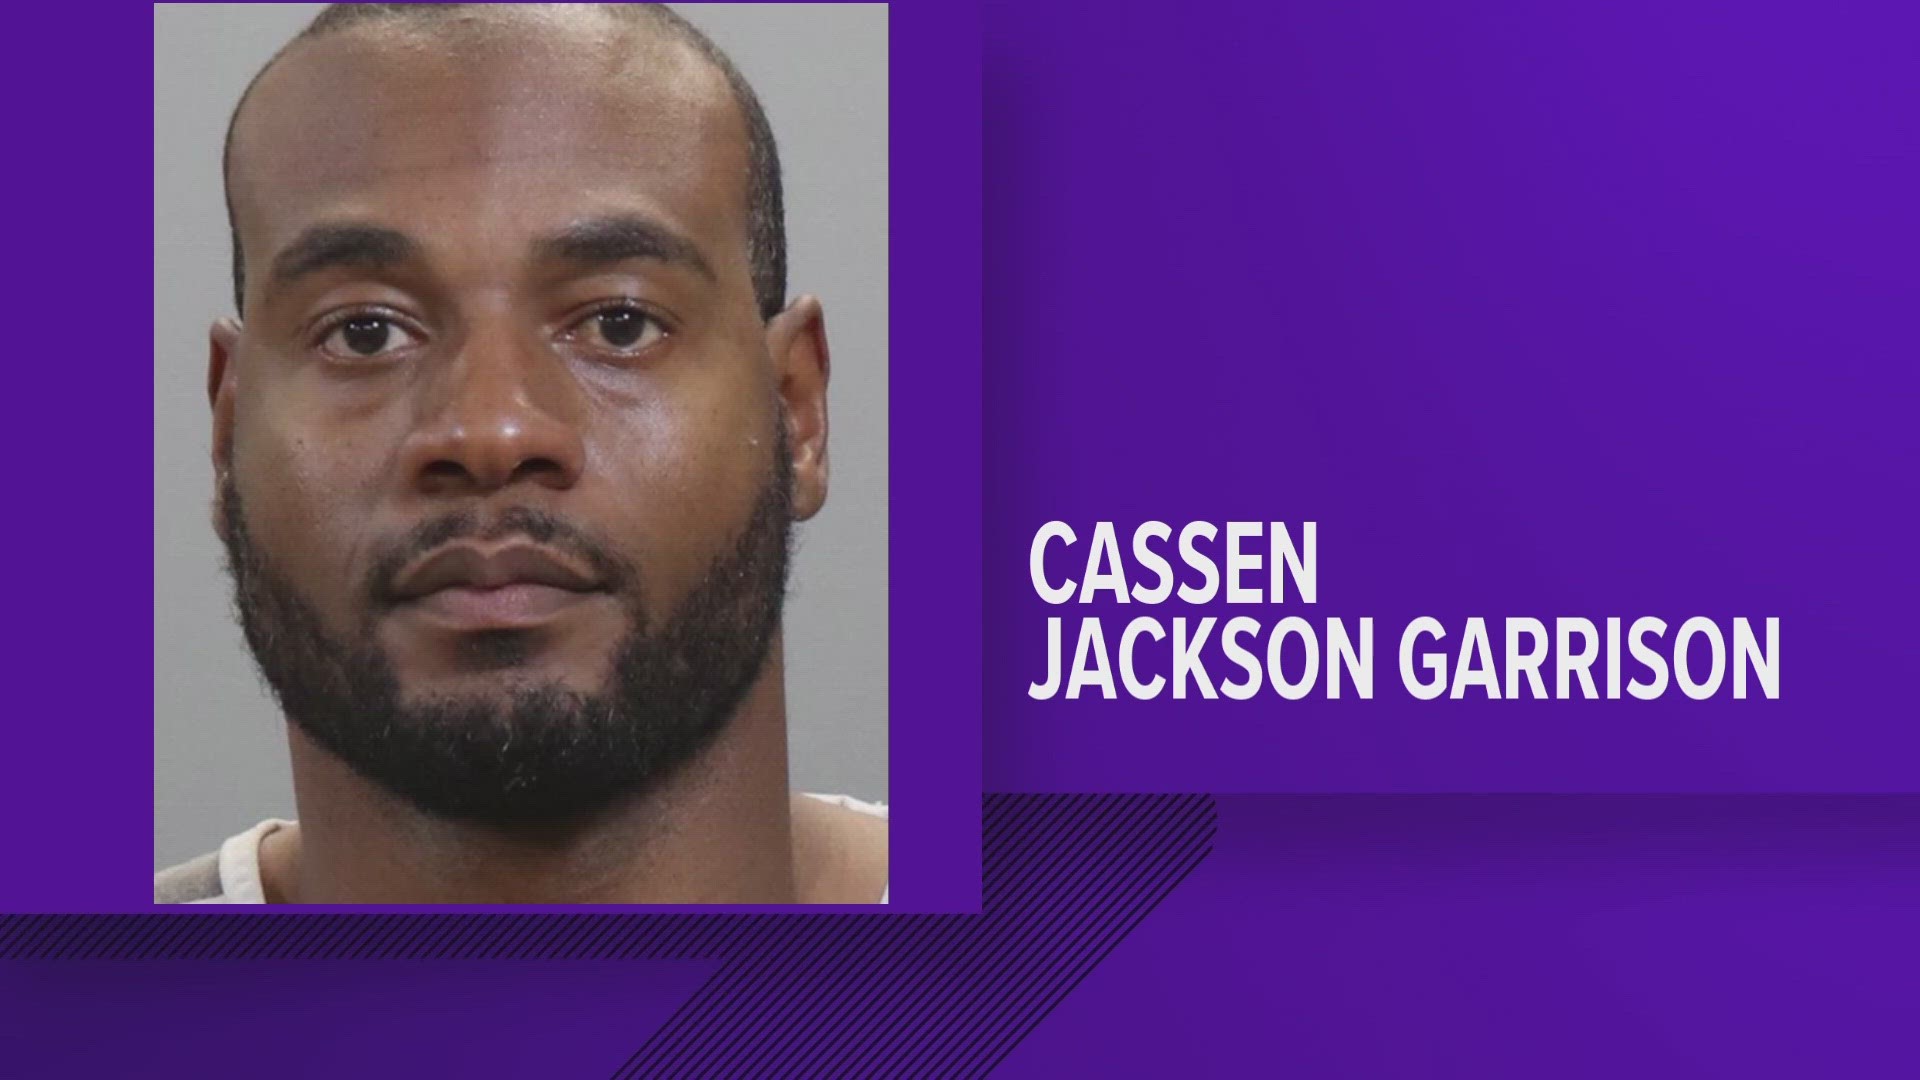 Cassen Jackson-Garrison is accused of abusing a 13-year-old girl. He served as an officer in both Knoxville and Oak Ridge.